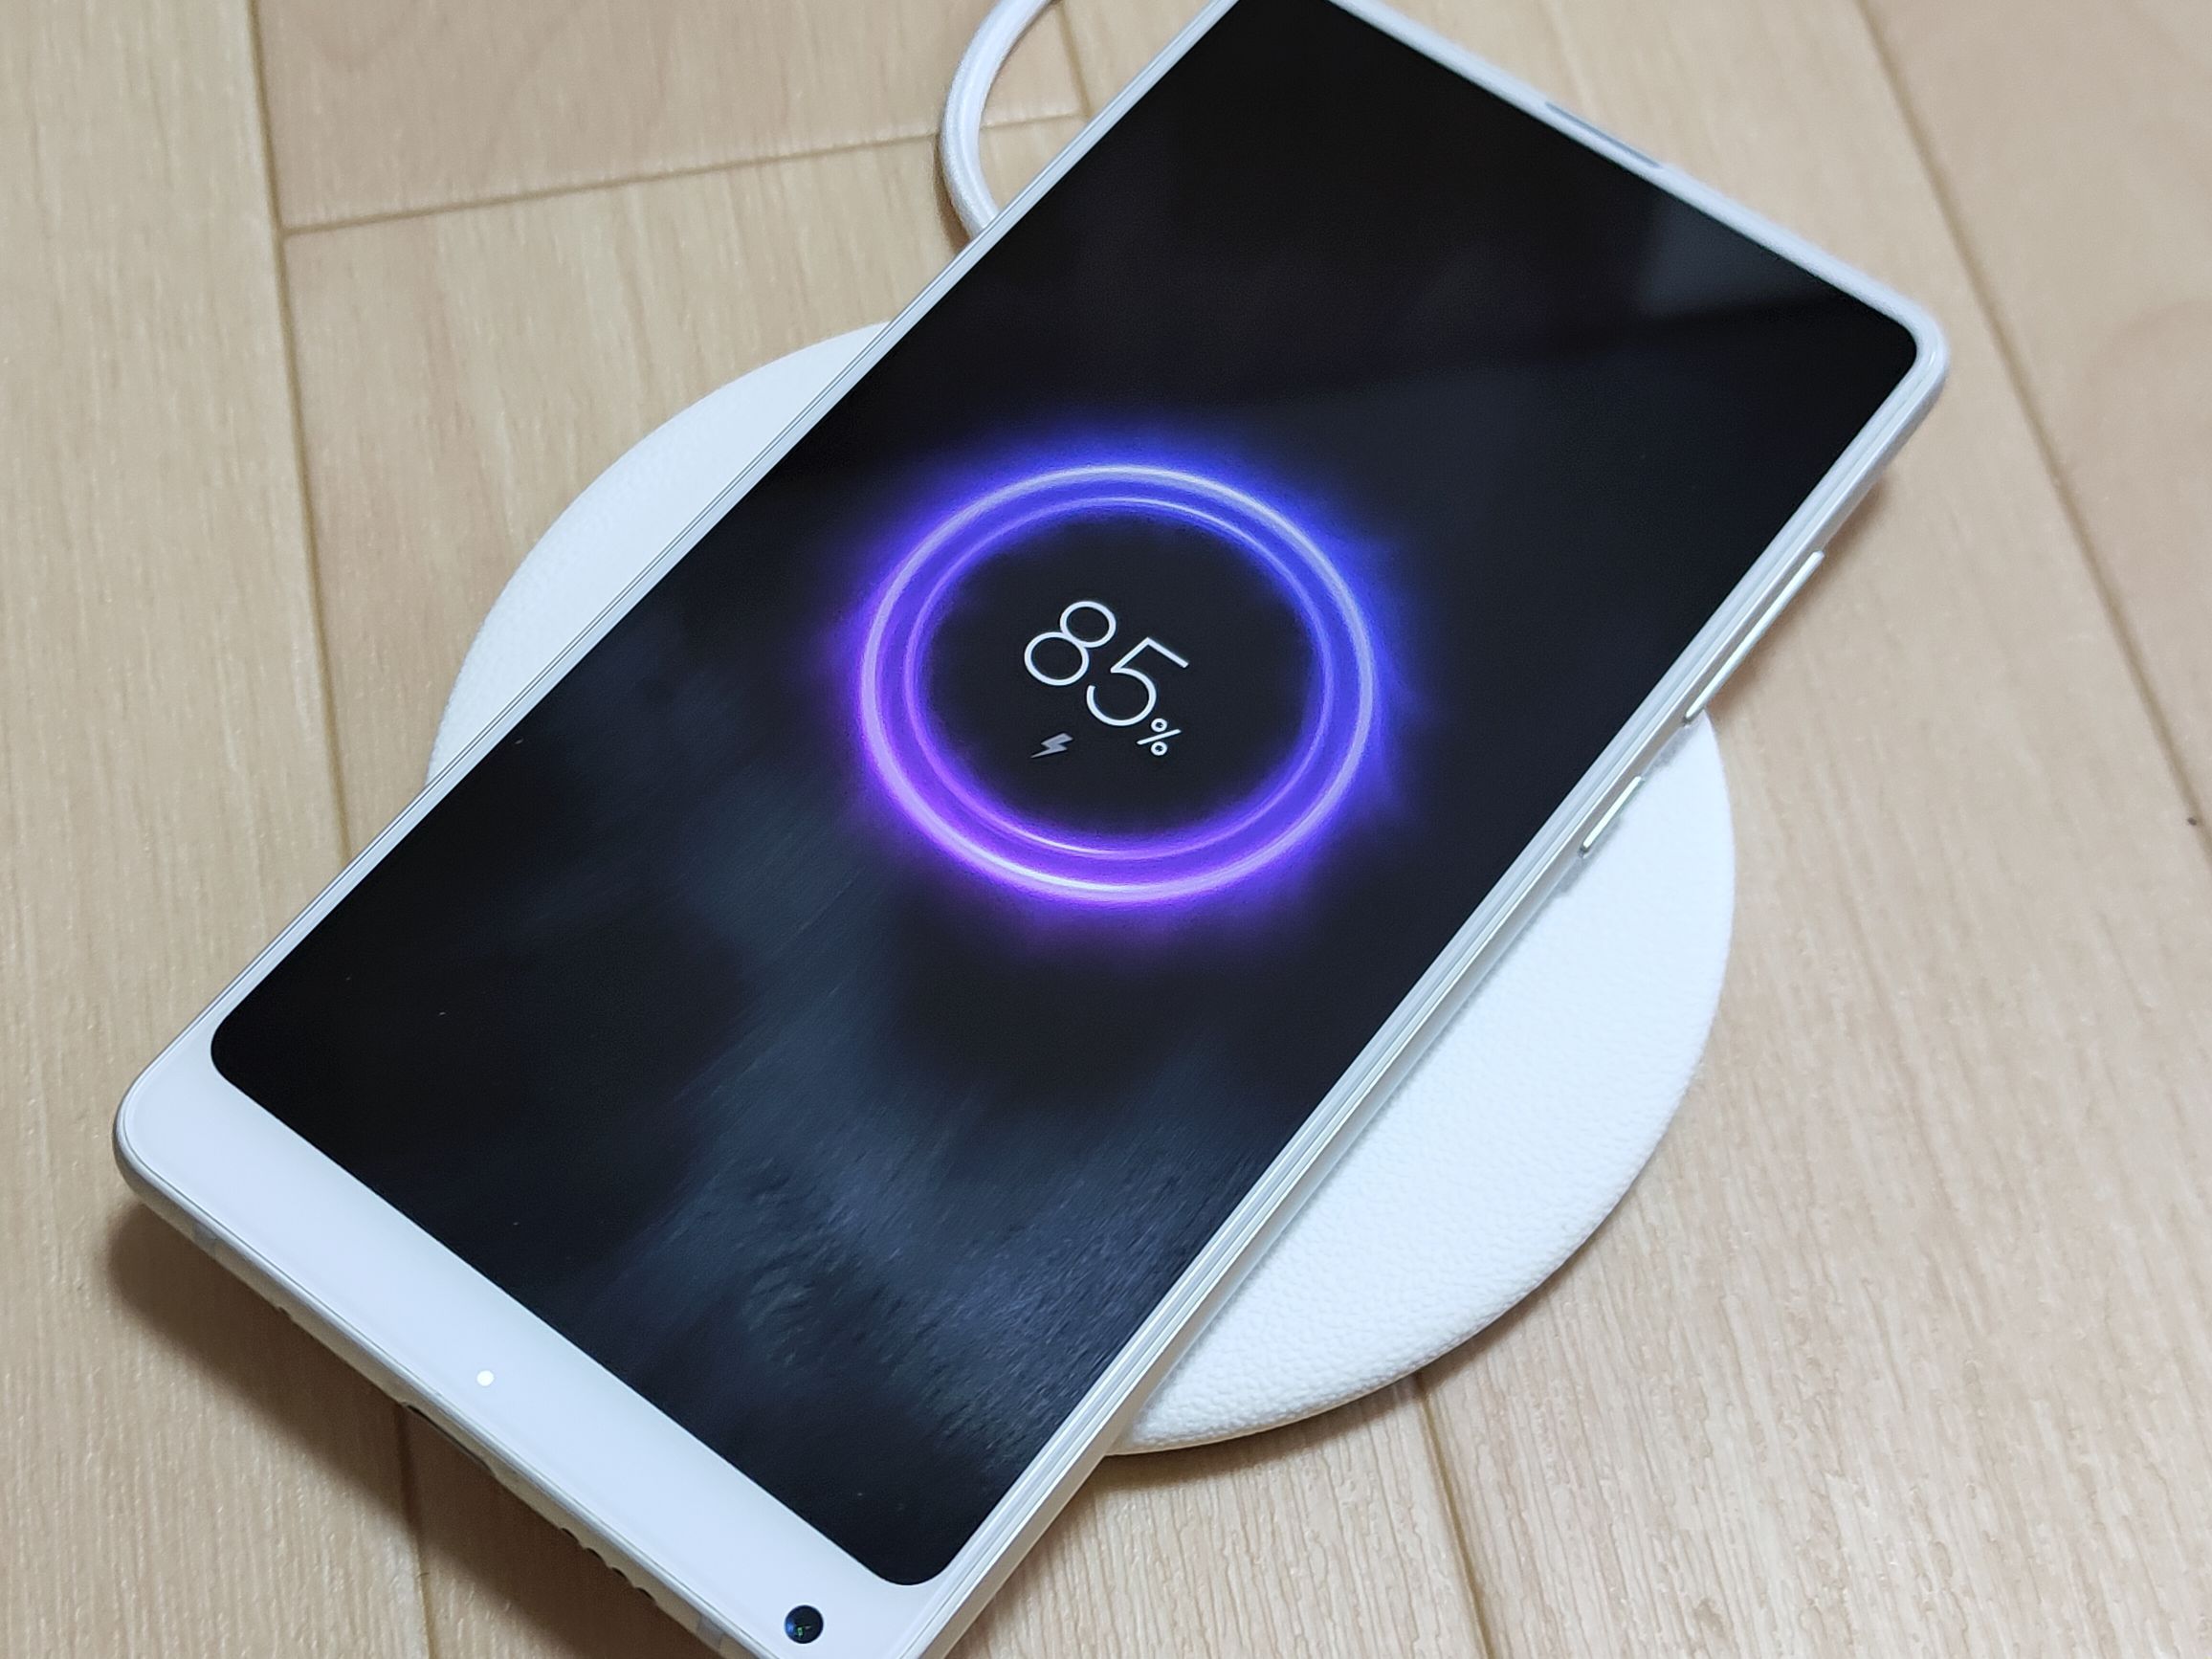 MEIZU Wireless Charger WP01 Review - Wireless charging is Great